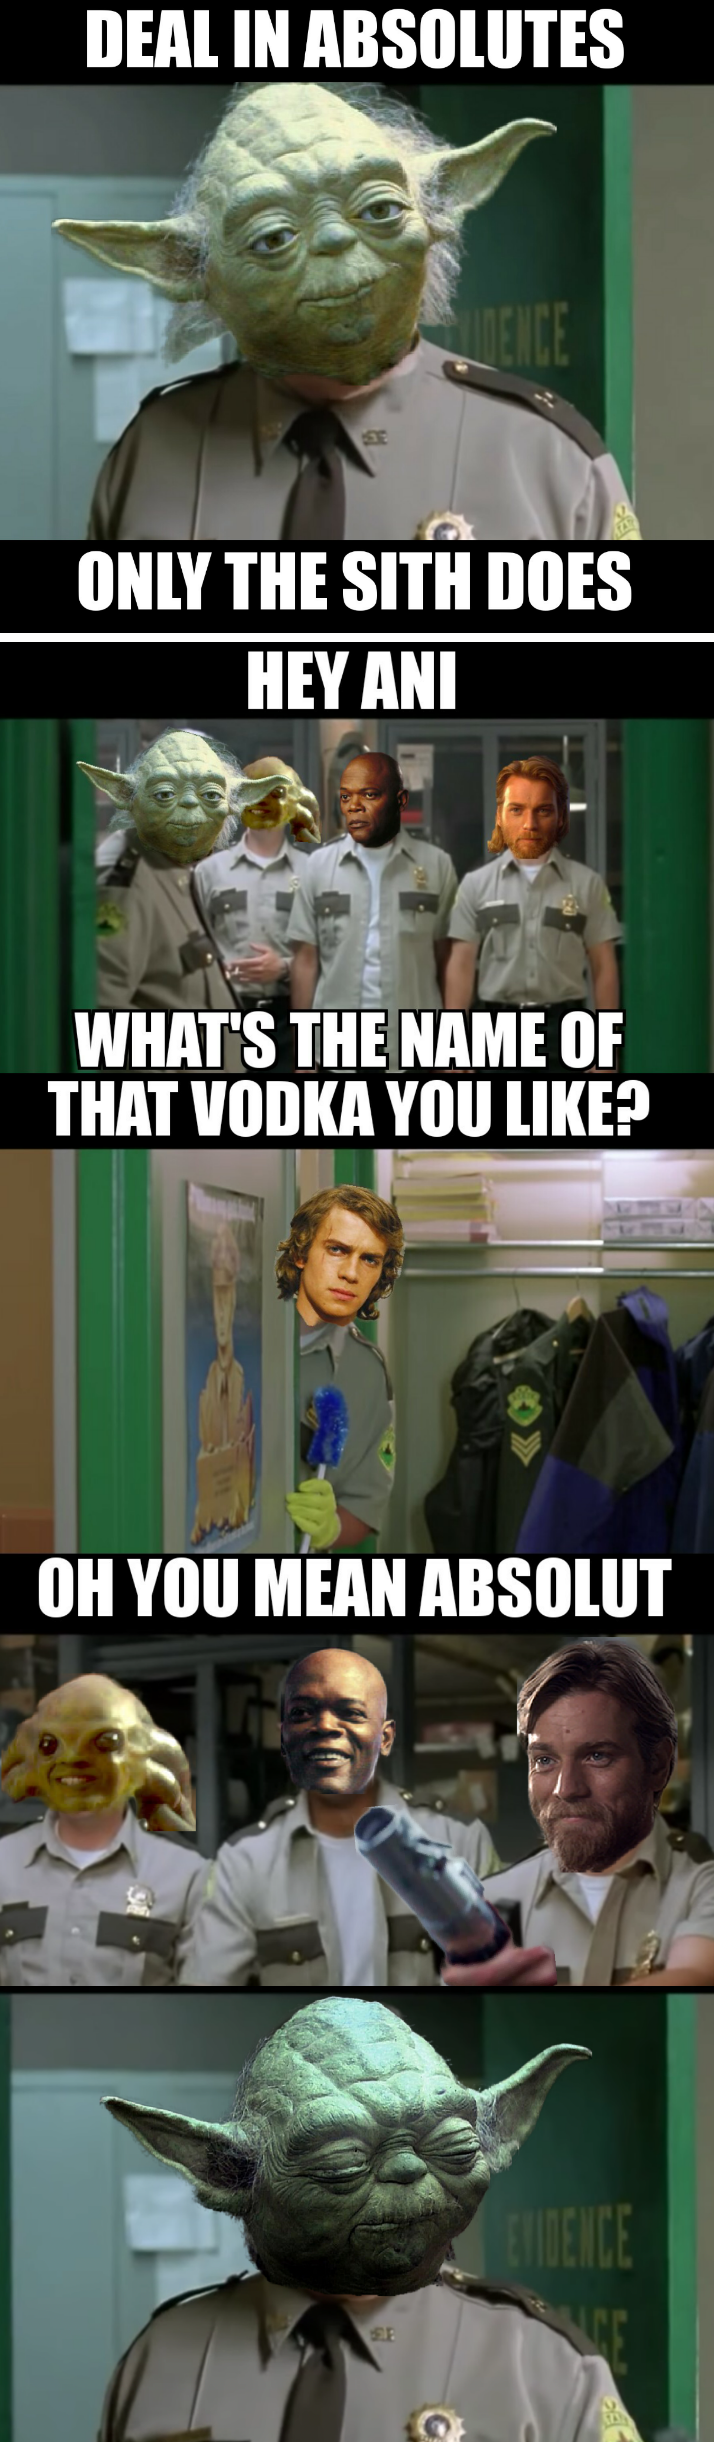 fanakin meme - Deal In Absolutes Only The Sith Does Hey Ani What'S The Name Of That Vodka You ? Oh You Mean Absolut